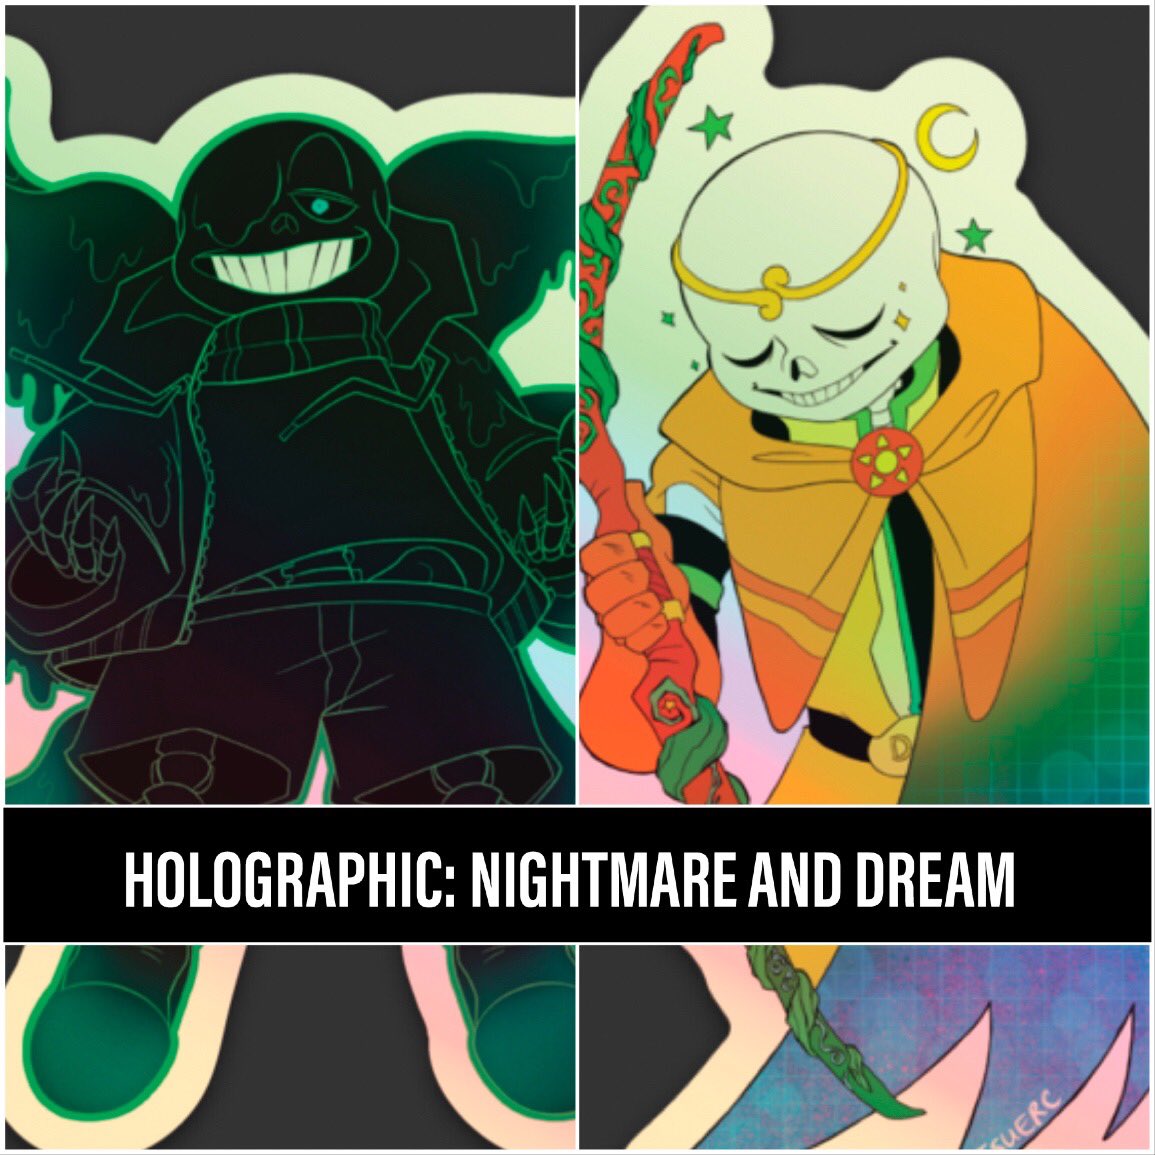 ((CORRECTED SHOP LINK!!))

My new Undertale AU sticker design are now available! Holographic stickers are now in stock! International orders OK!
#undertaleAU

SHOP: https://t.co/An36tYMzUC 